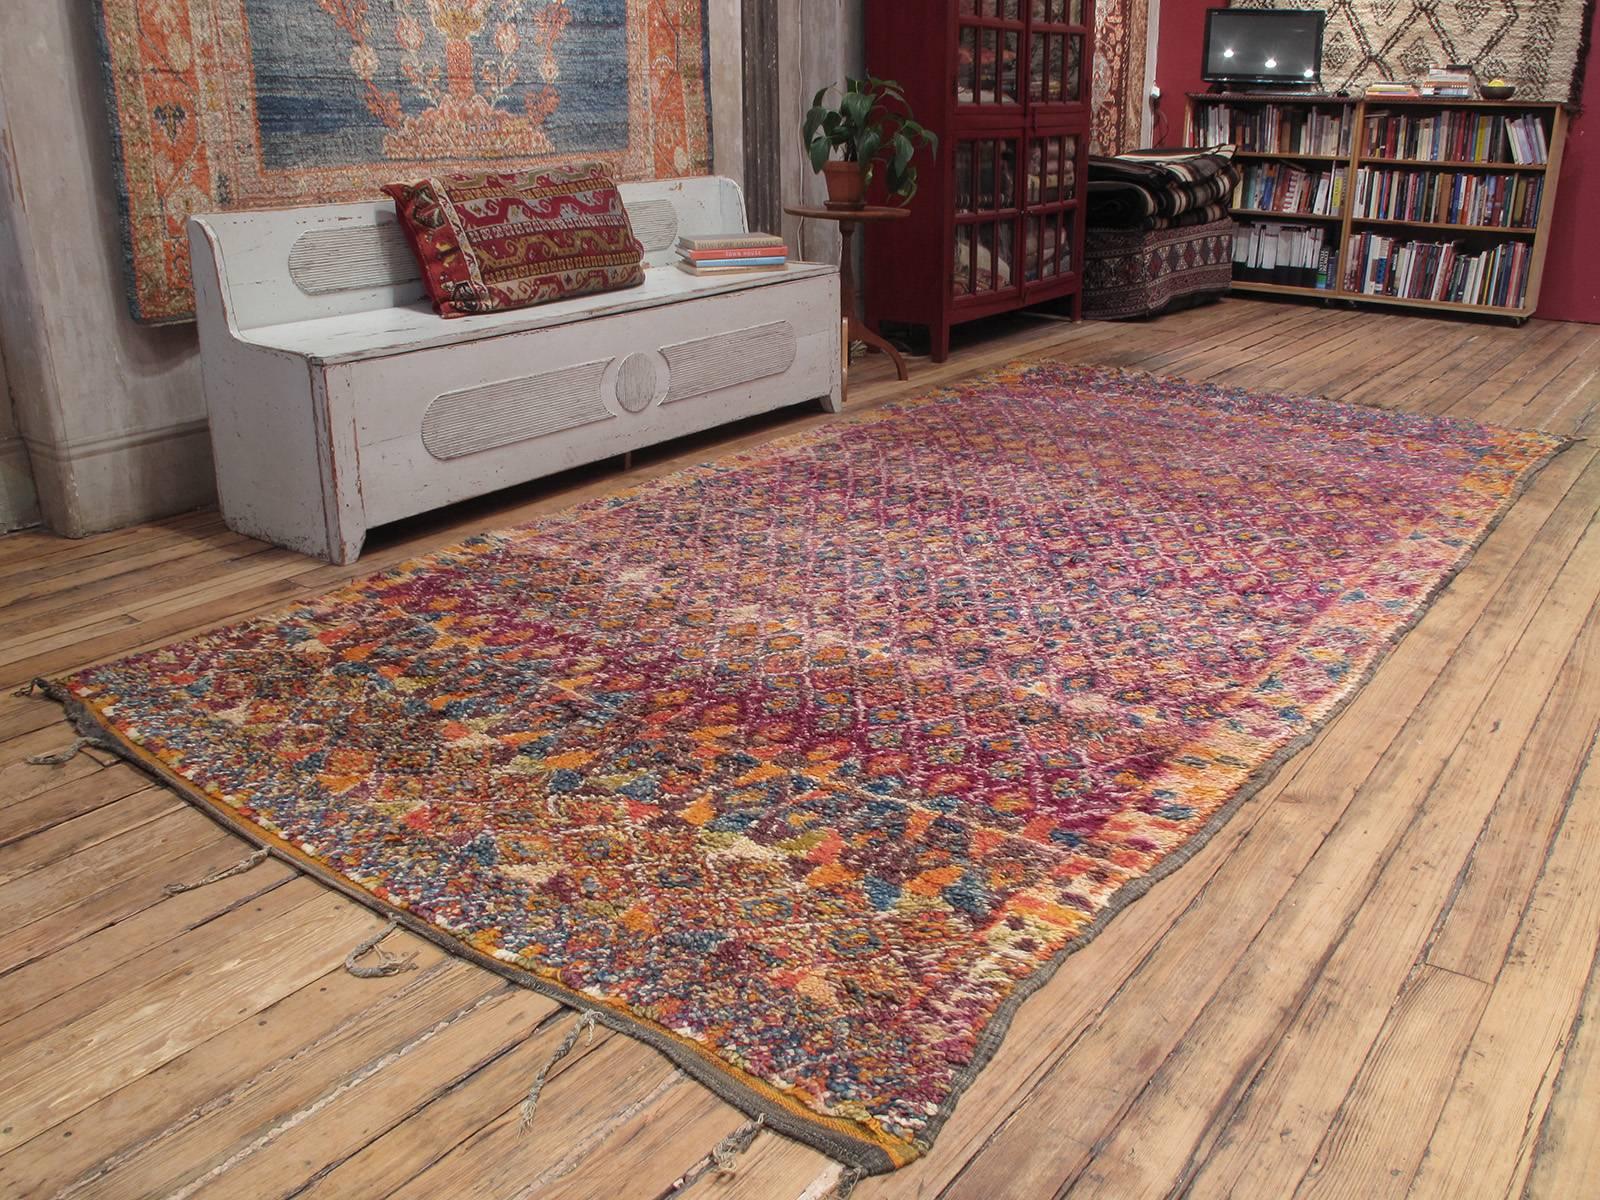 A great old Berber carpet from Morocco, woven by the Beni Mguild tribes of the Middle Atlas Mountains. An interesting example featuring a somewhat unusual design type in richly saturated tones of purple, blue and orange. A very large, heavy and